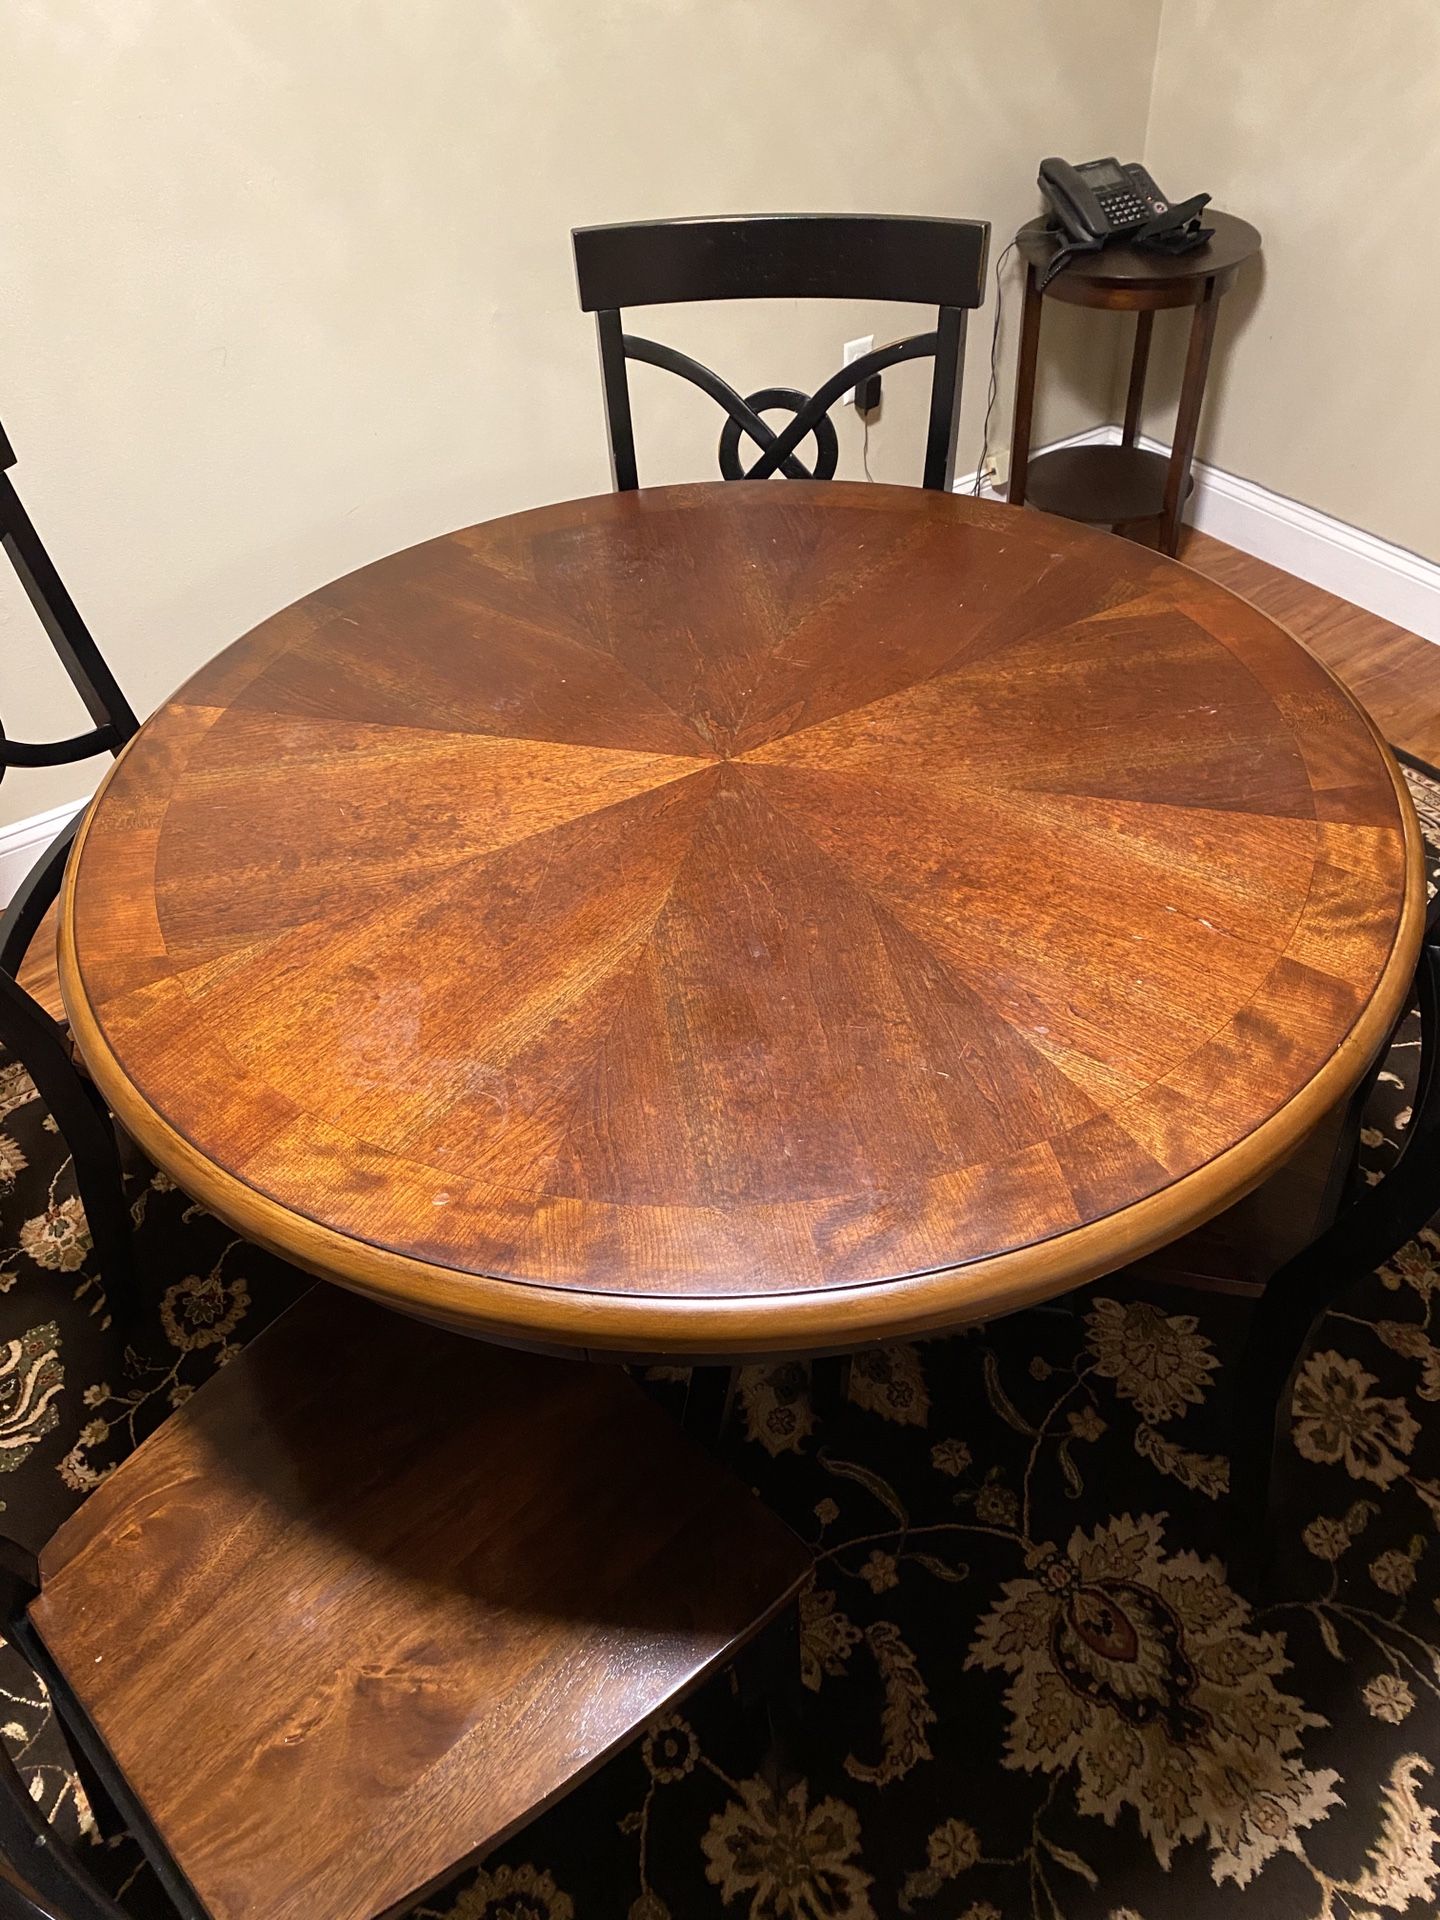 Round solid wood dining table with 4 chairs